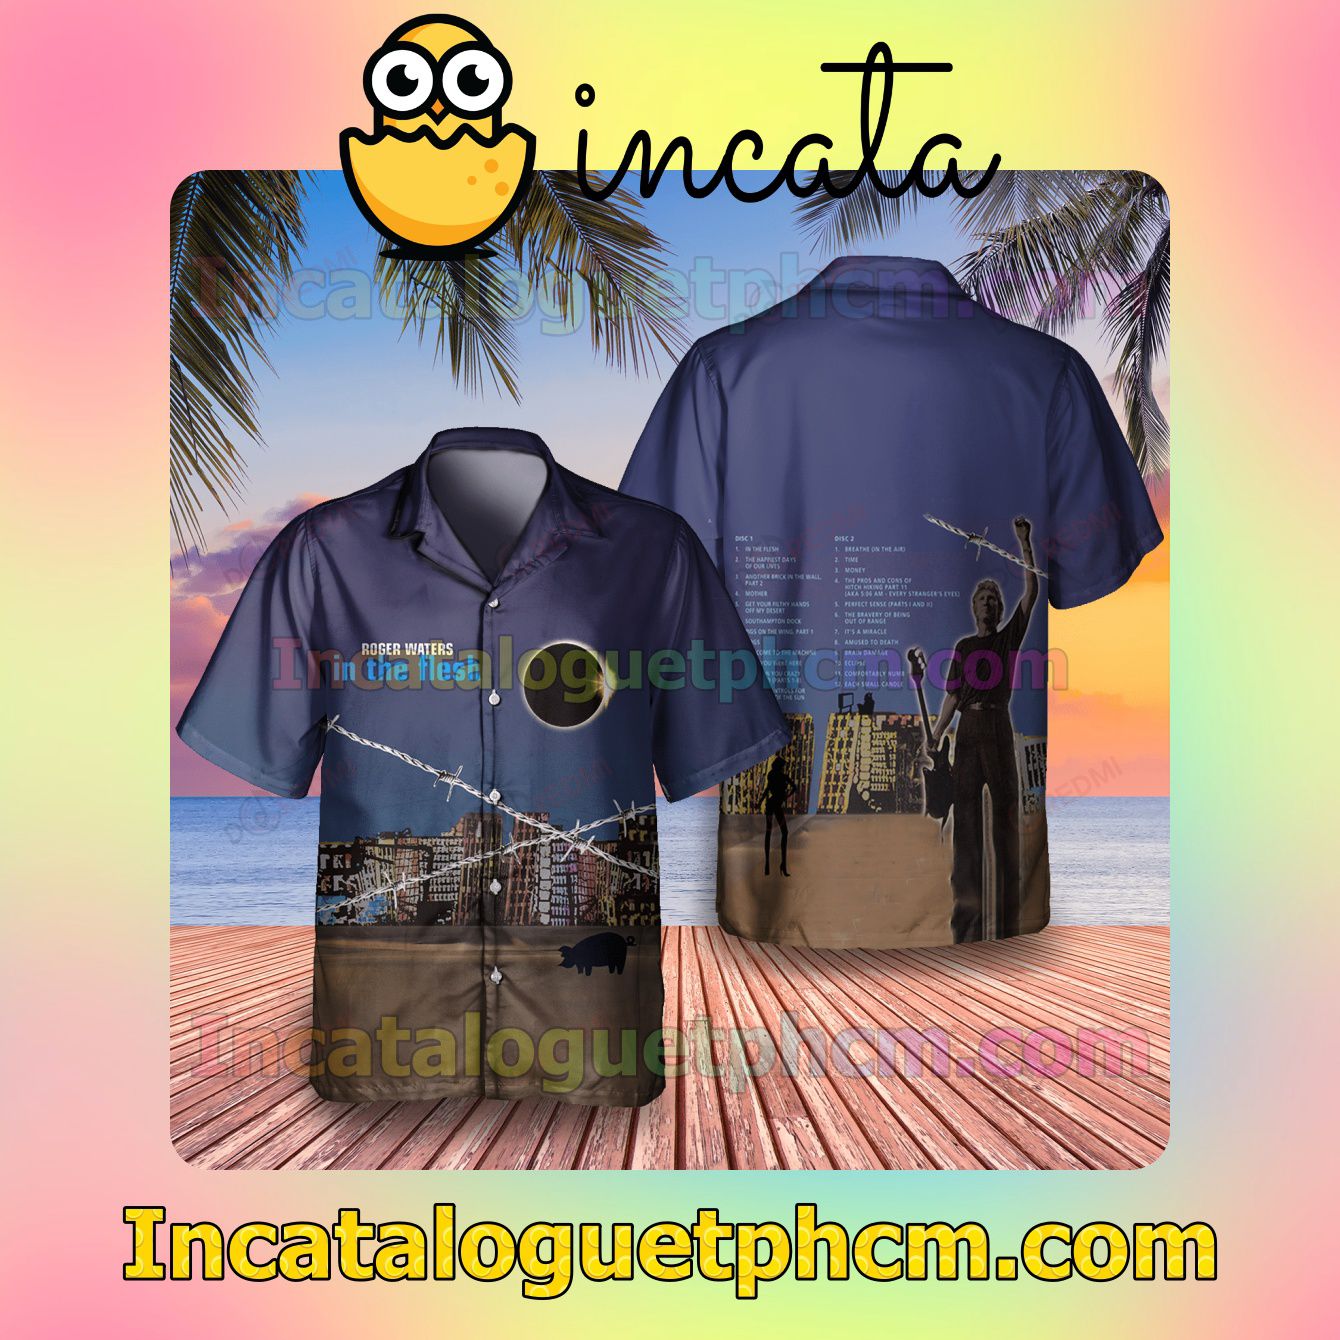 Roger Waters In The Flesh Album Cover Men Vacation Shirts